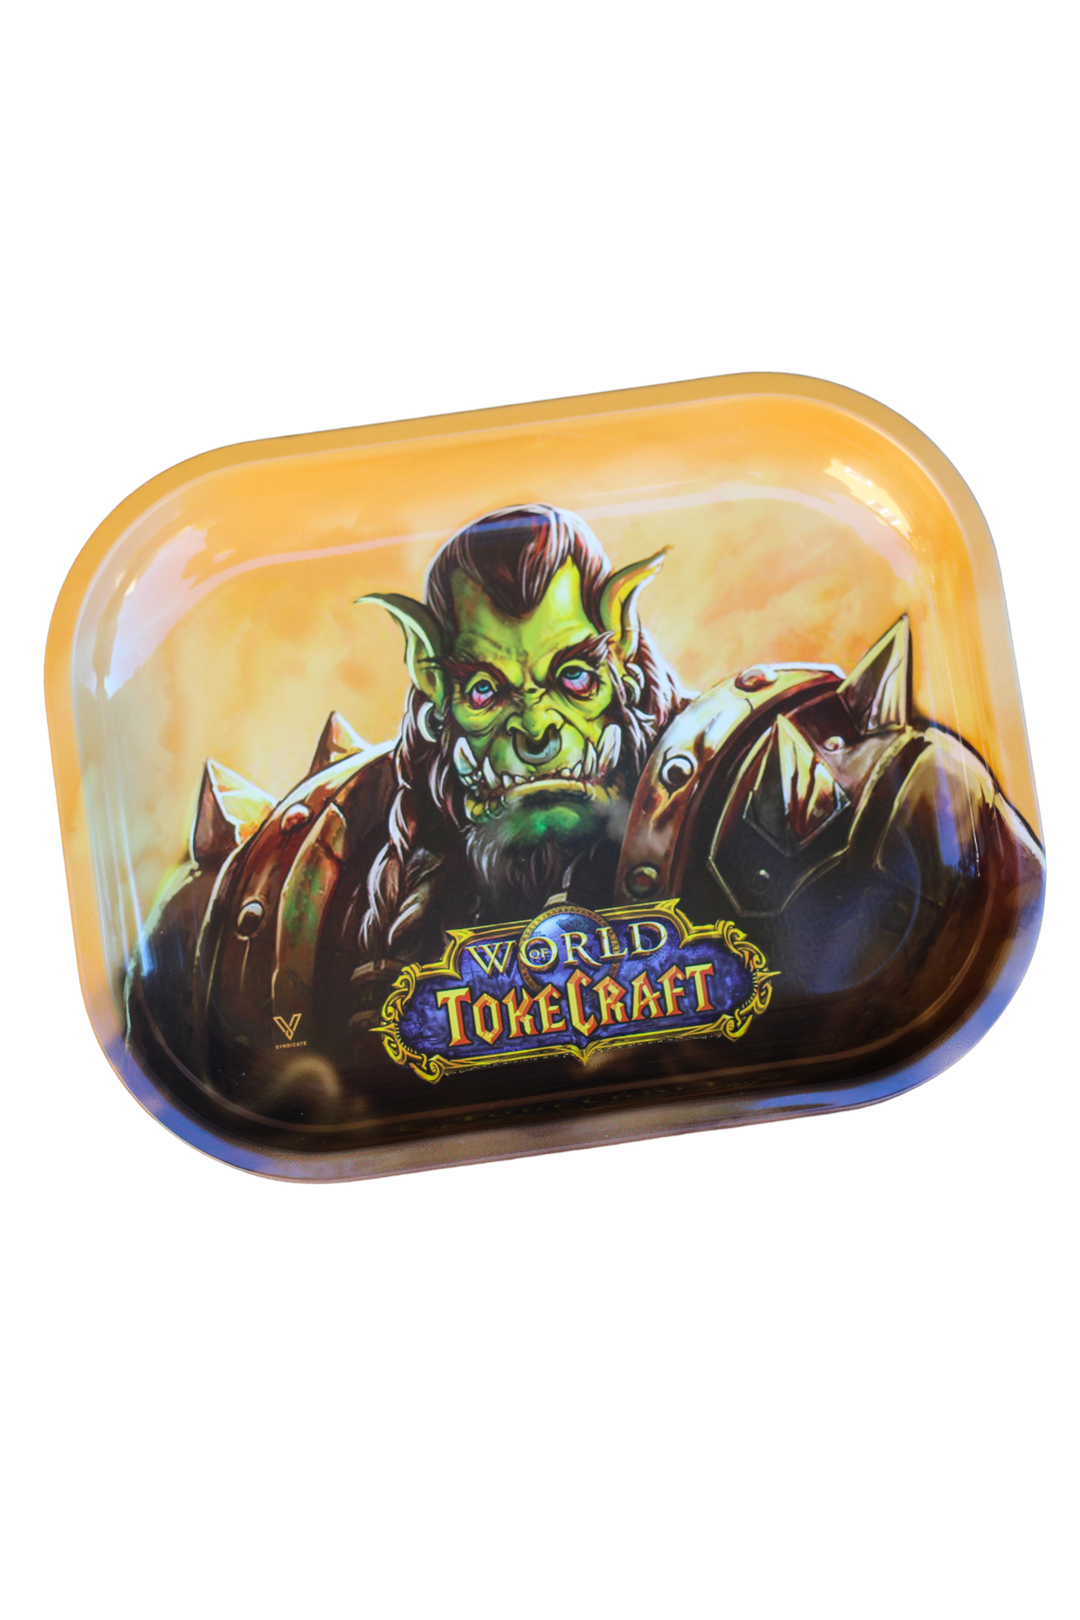 World of Tokecraft Rolling Tray - The SWL Store 